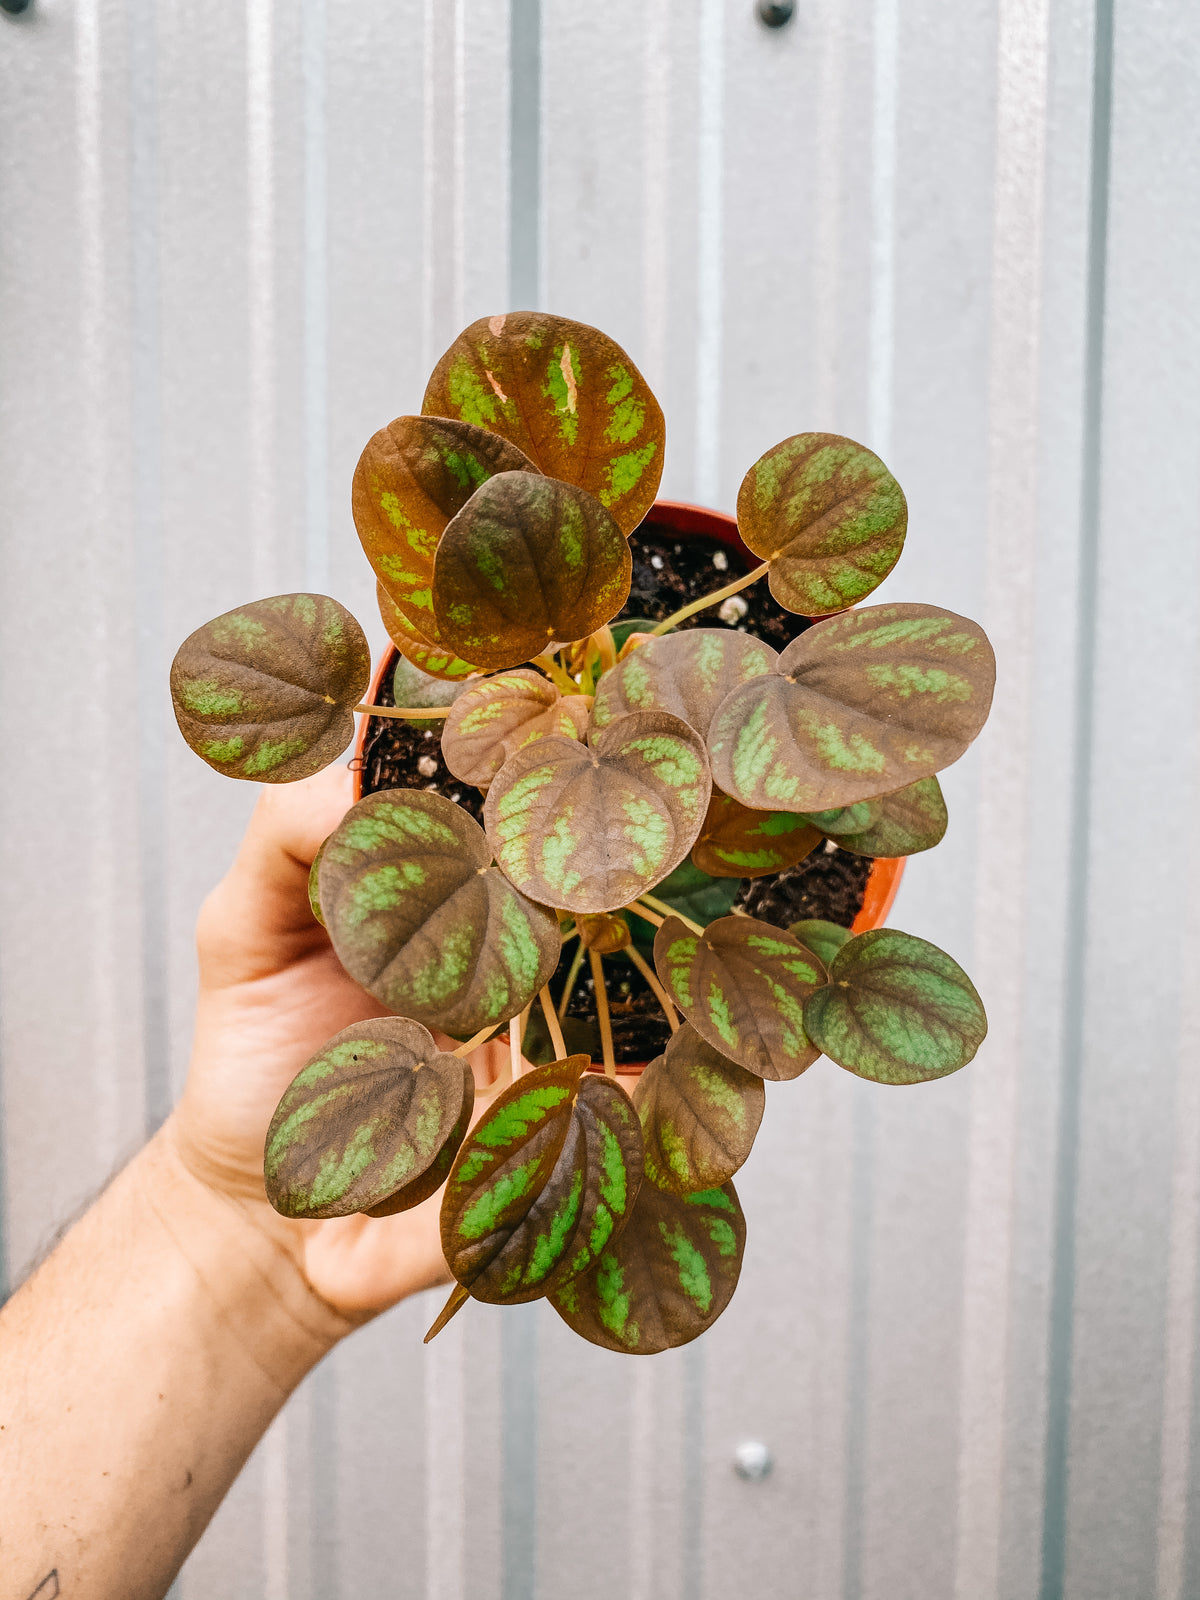 4" Peperomia 'Peppermill'